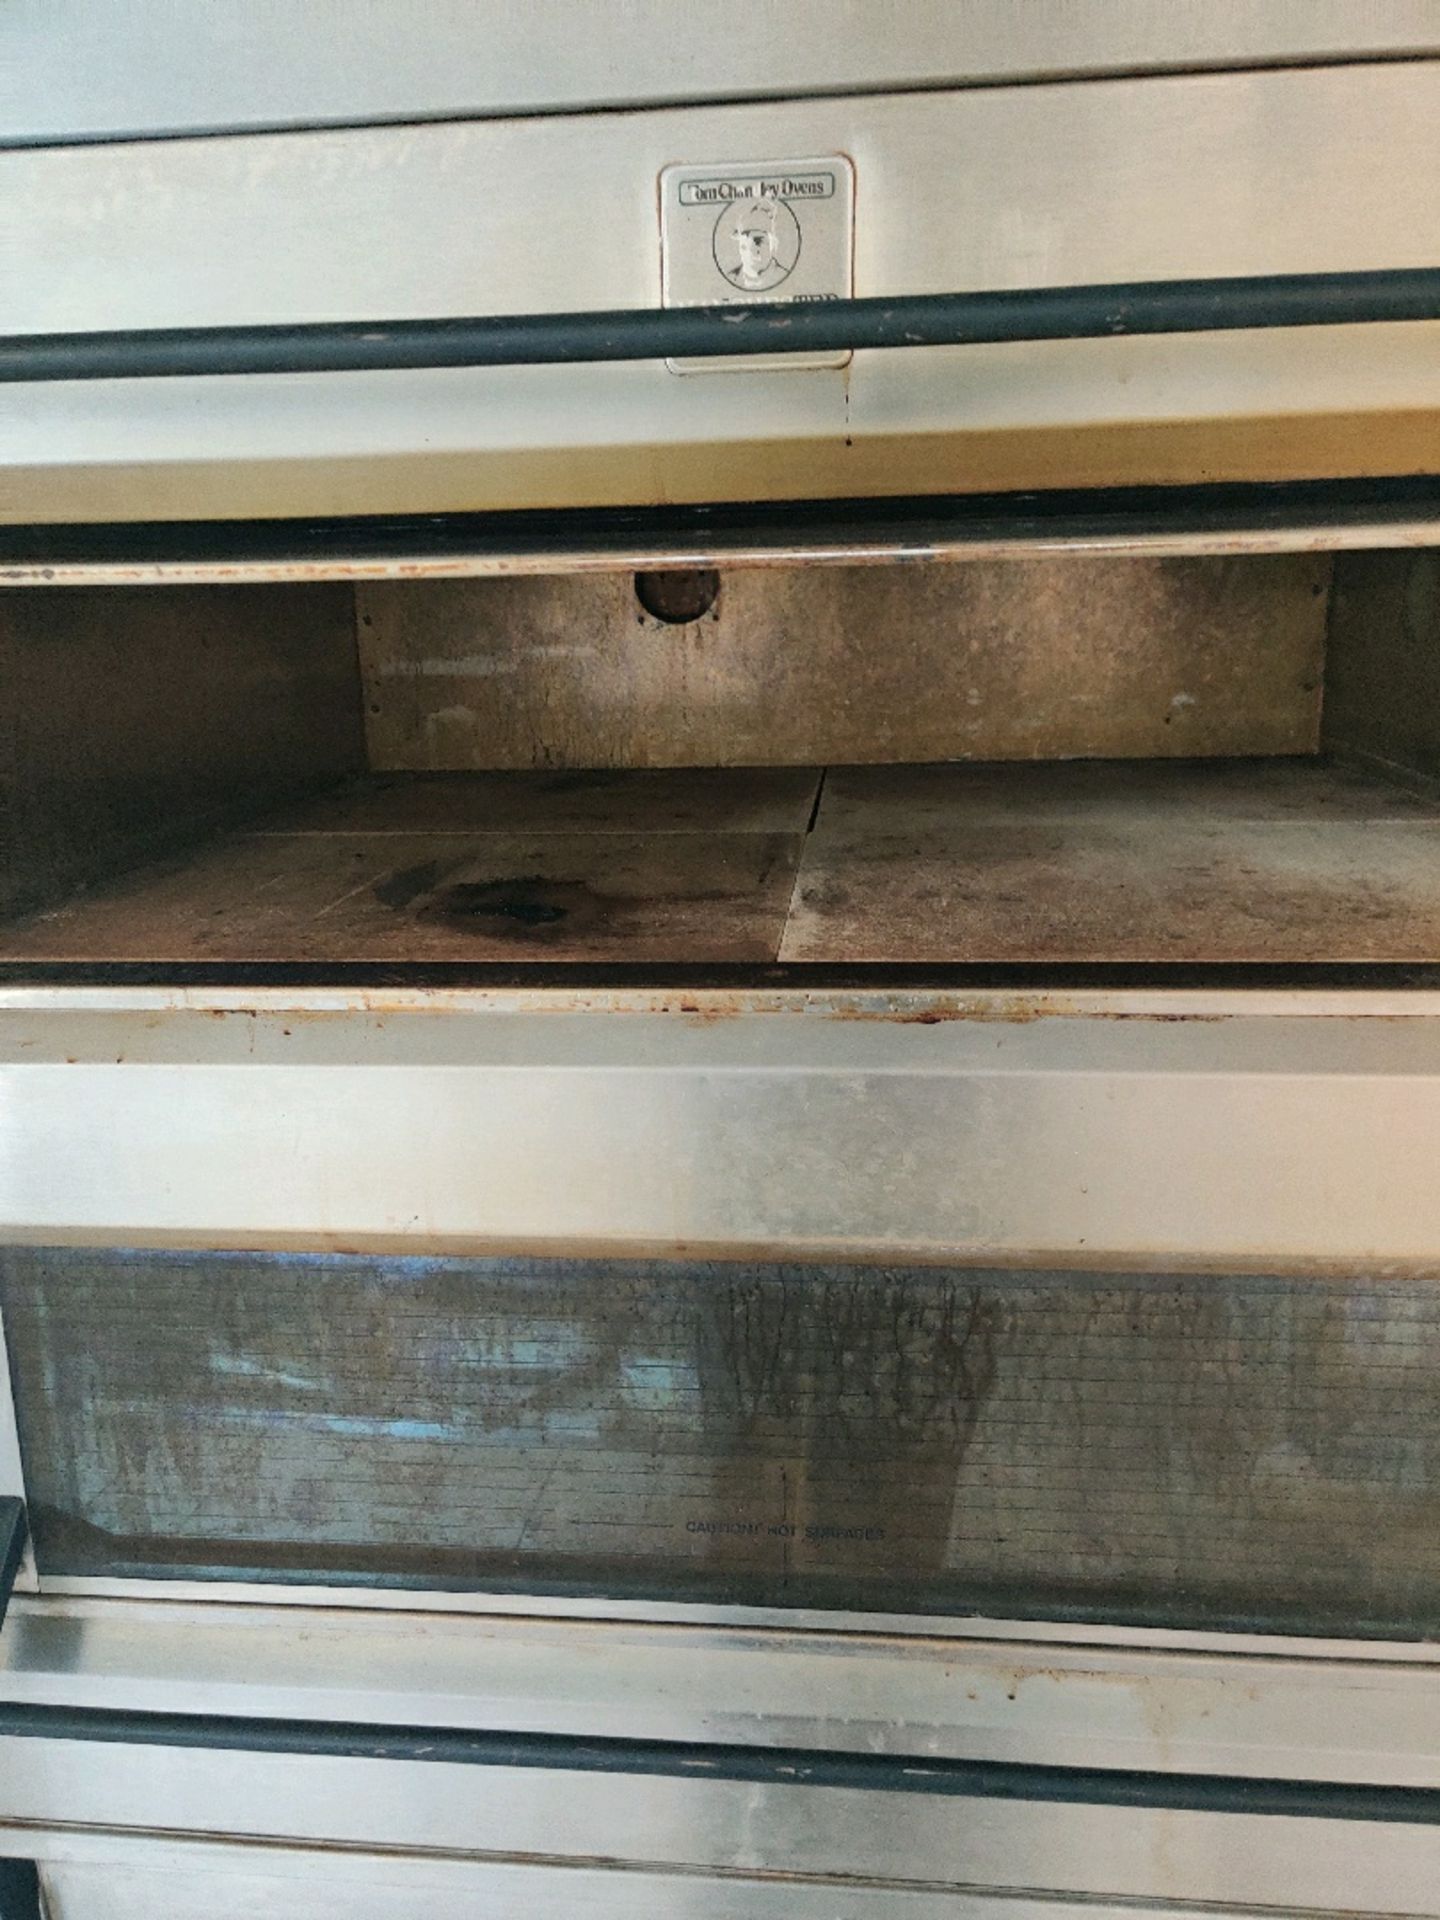 Tom chandley compacta oven - Image 4 of 8